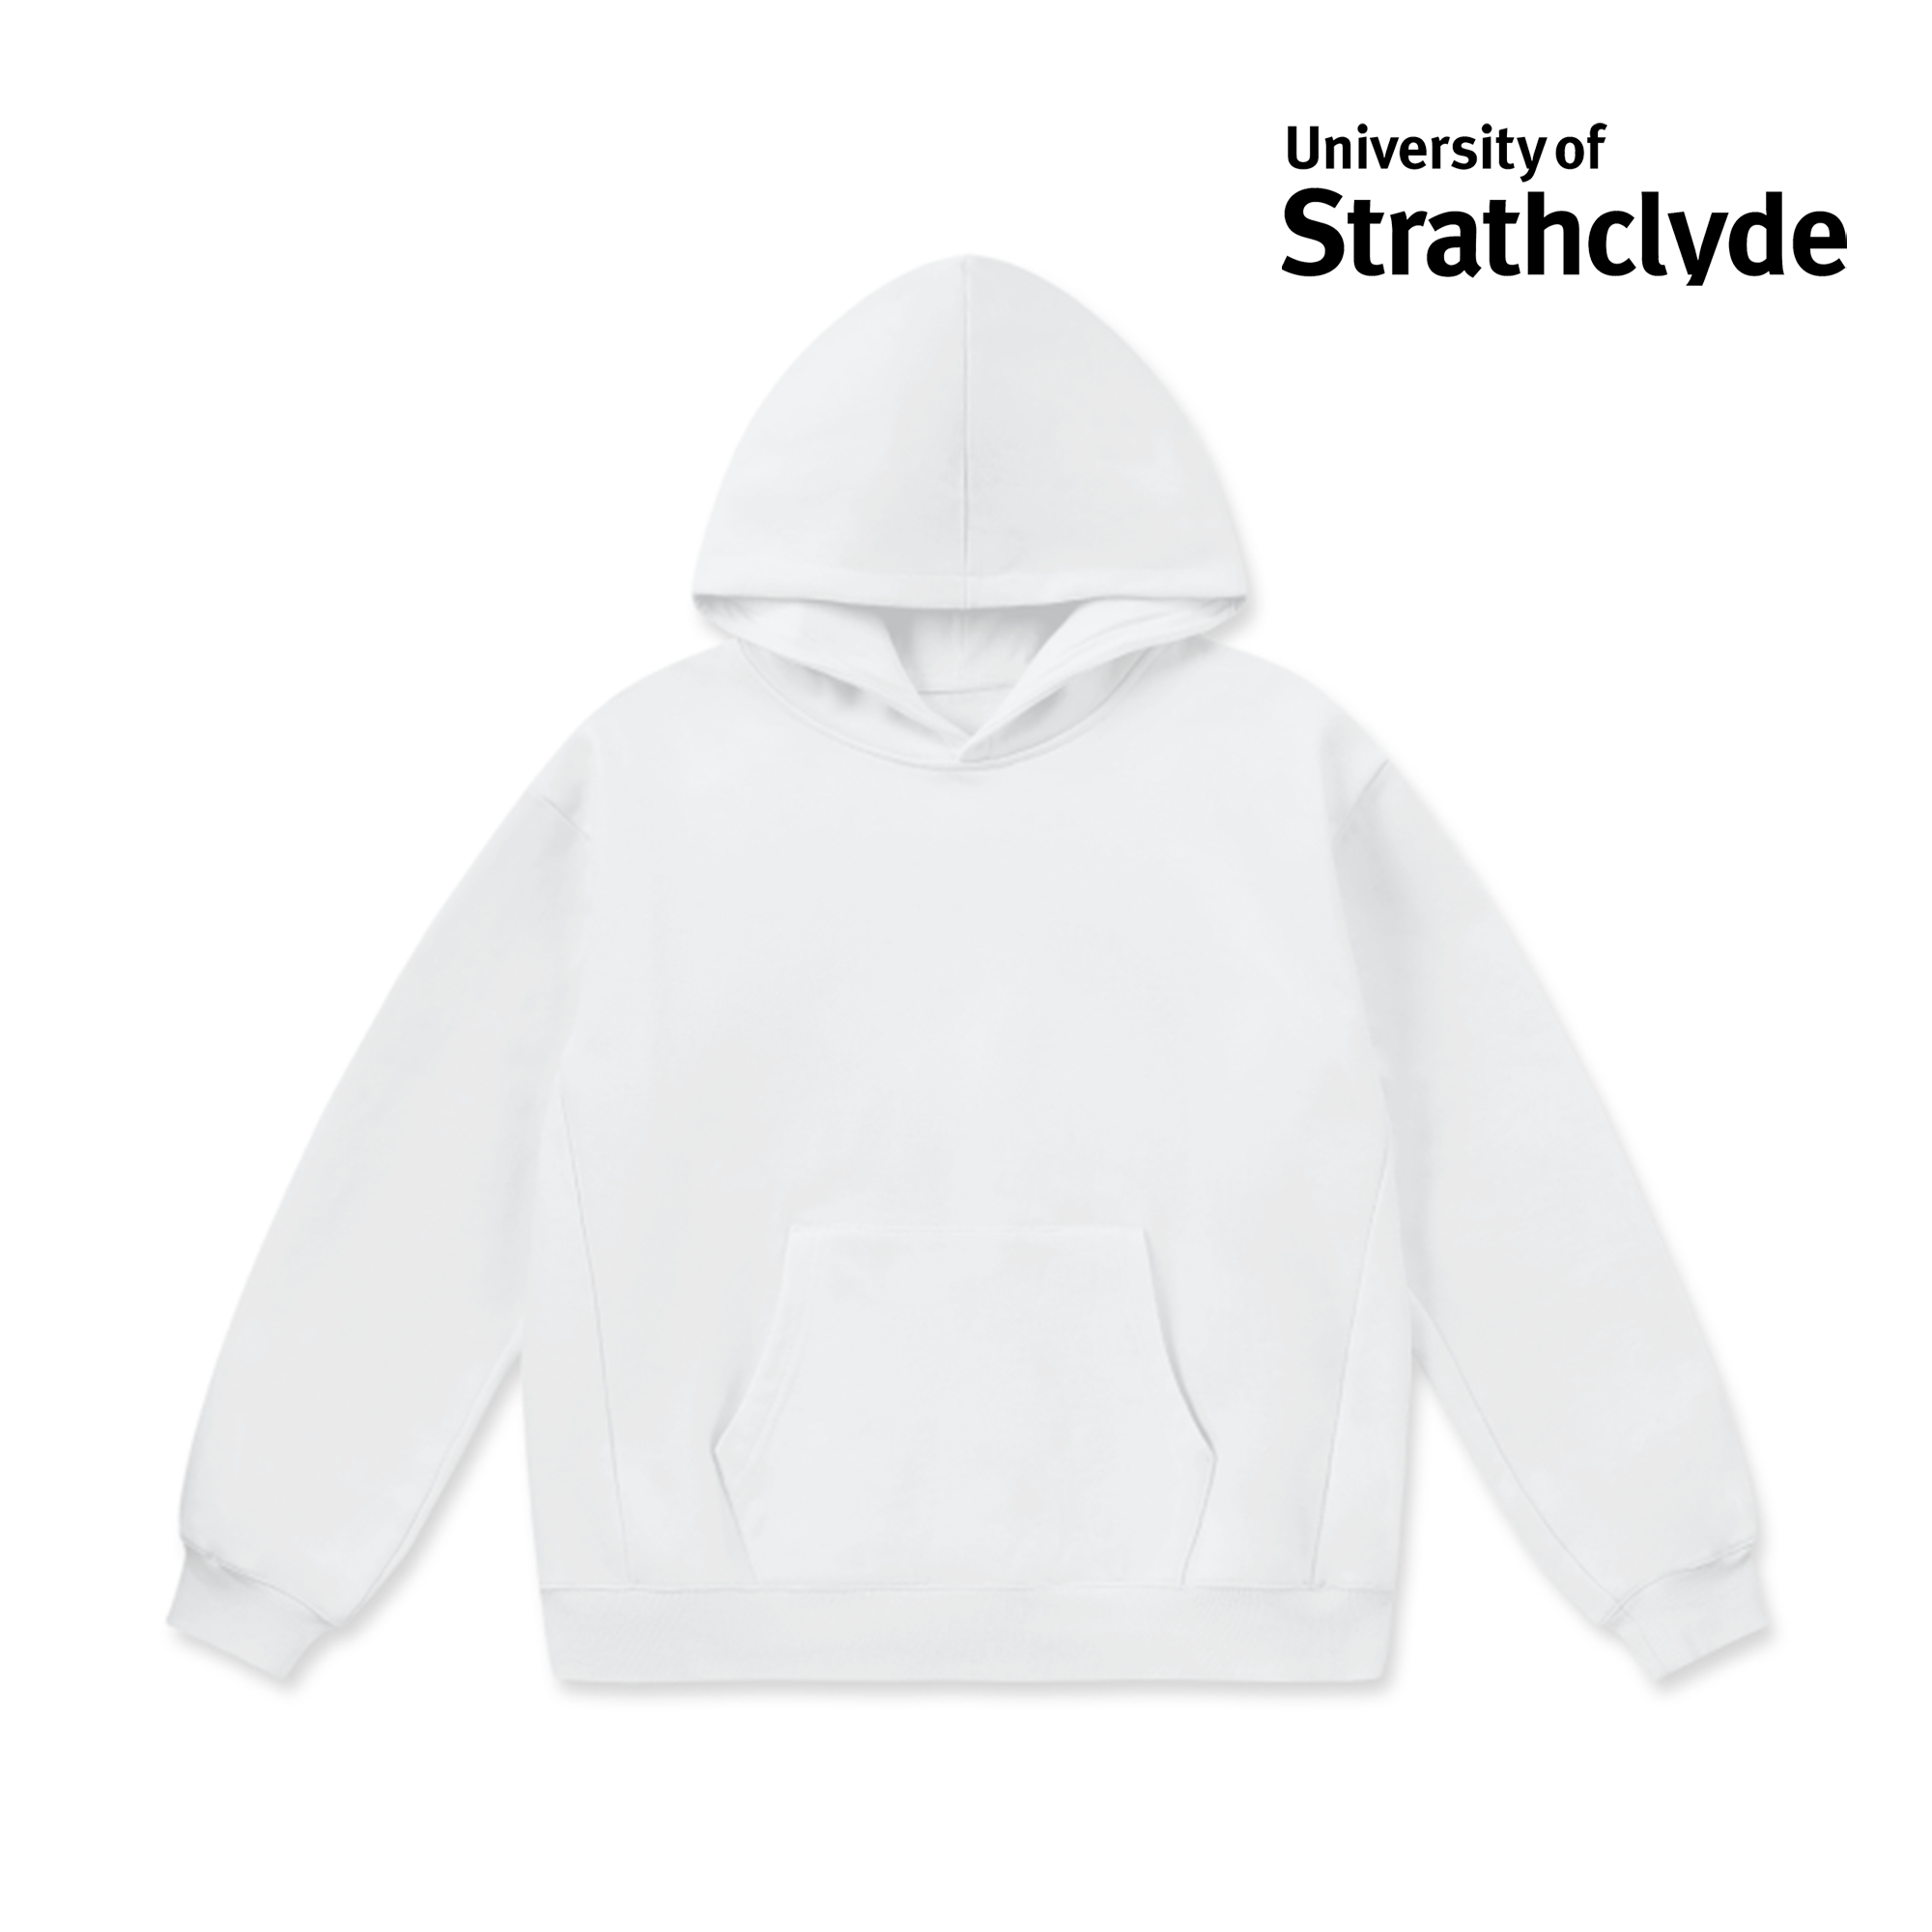 LCC Super Weighted Hoodie - University of Strathclyde Glasgow (Modern)